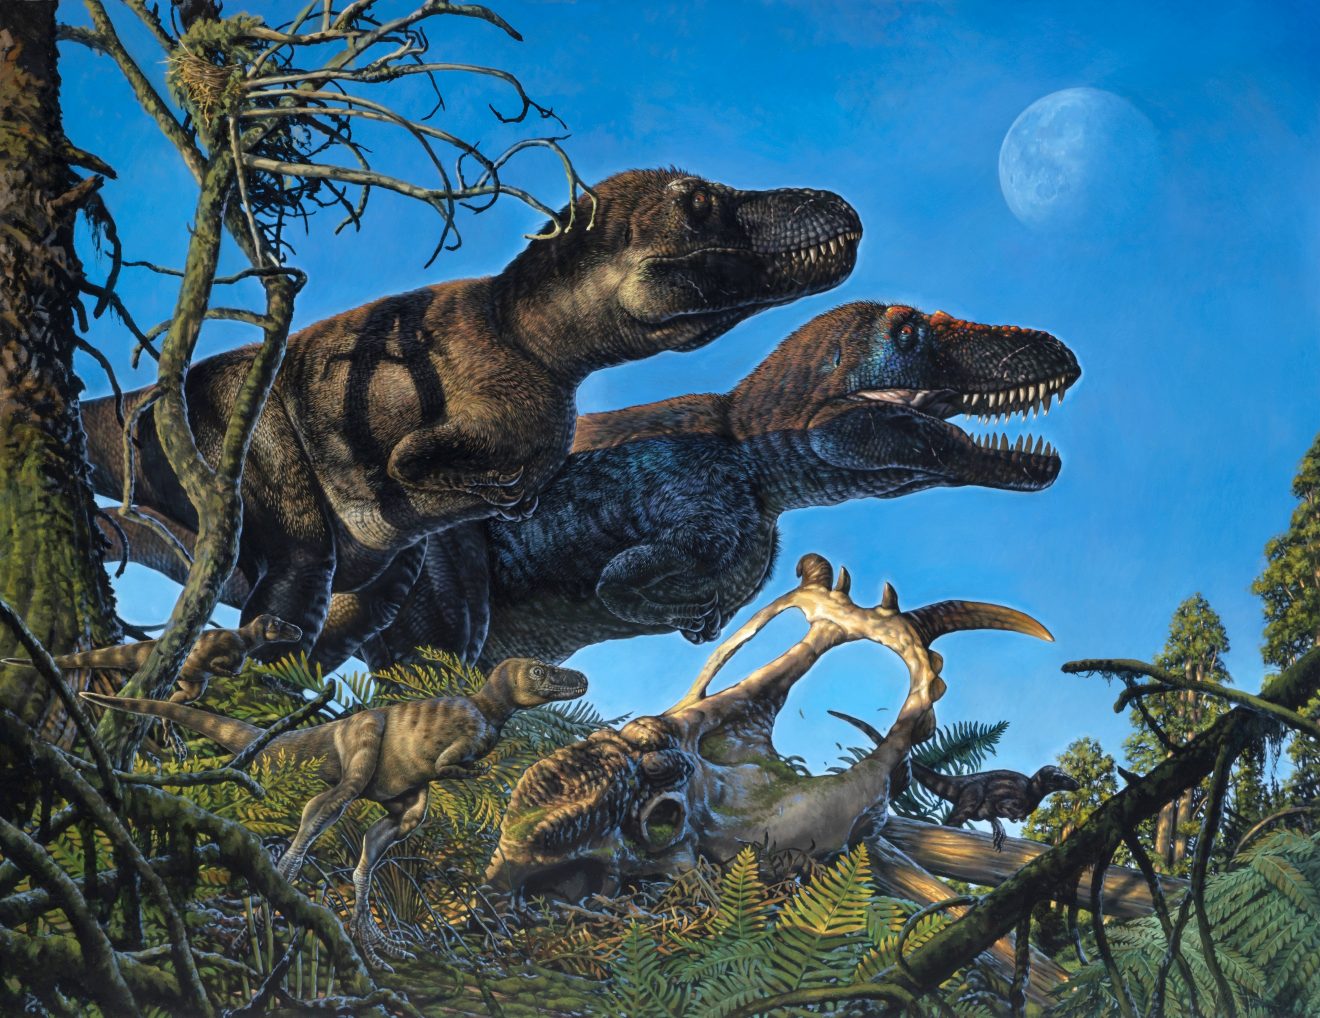 Artwork of adult and juvenile dinosaurs